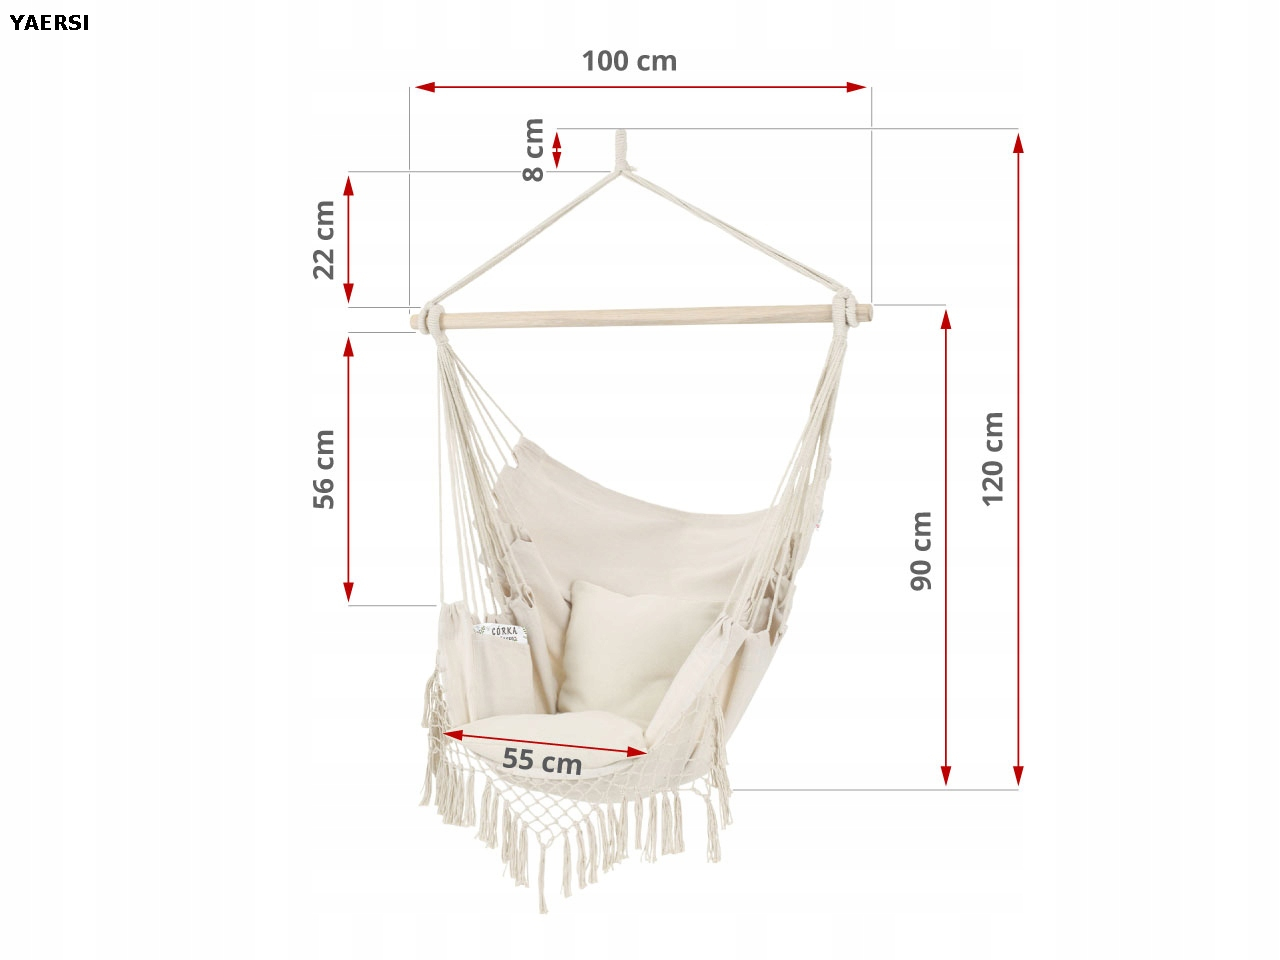 Hammock chair with Two Cushions